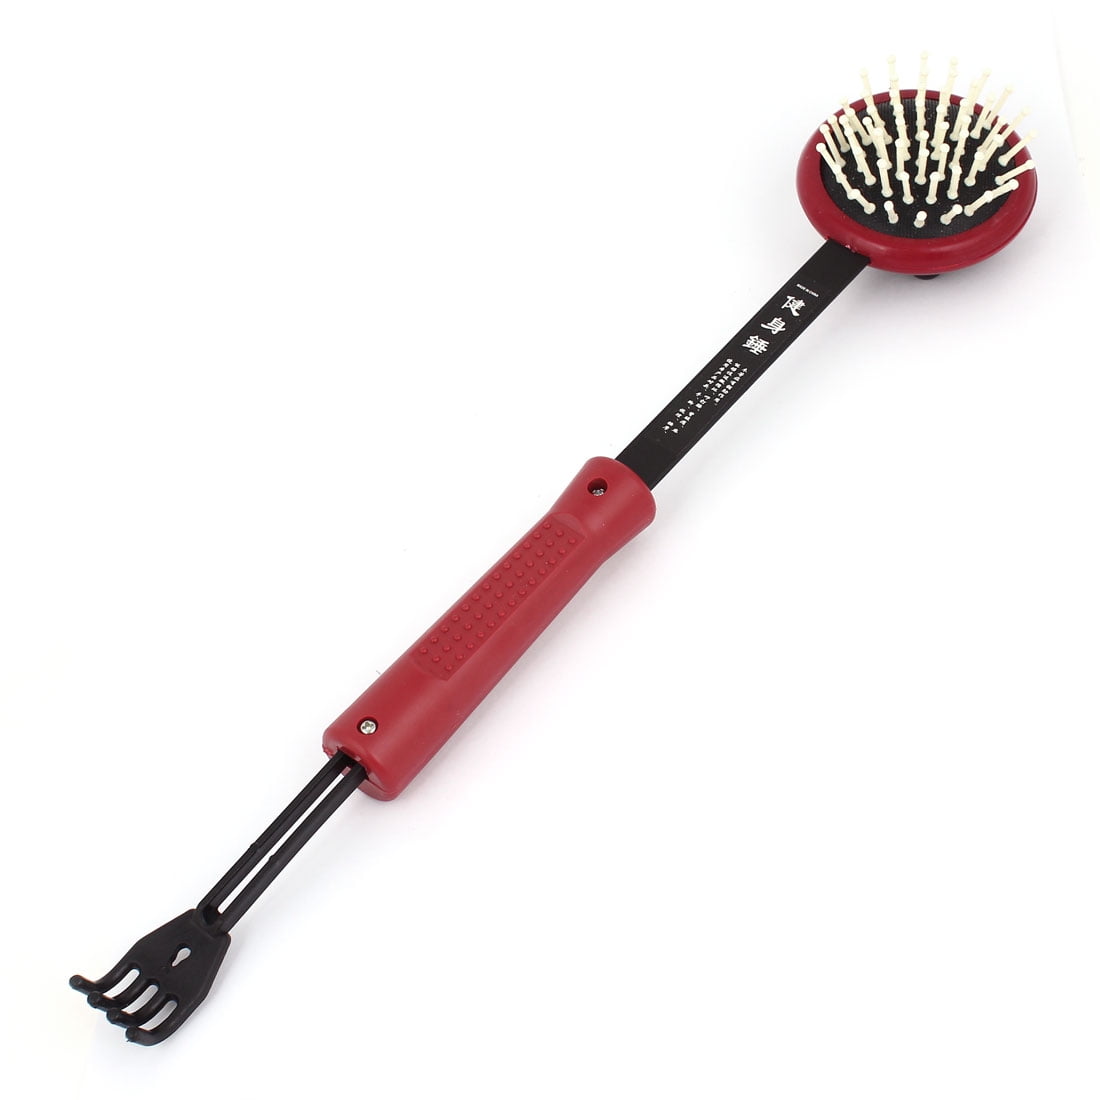 2 in 1 Handheld Percussion Massager Tool Massage Hammer Back Scratcher